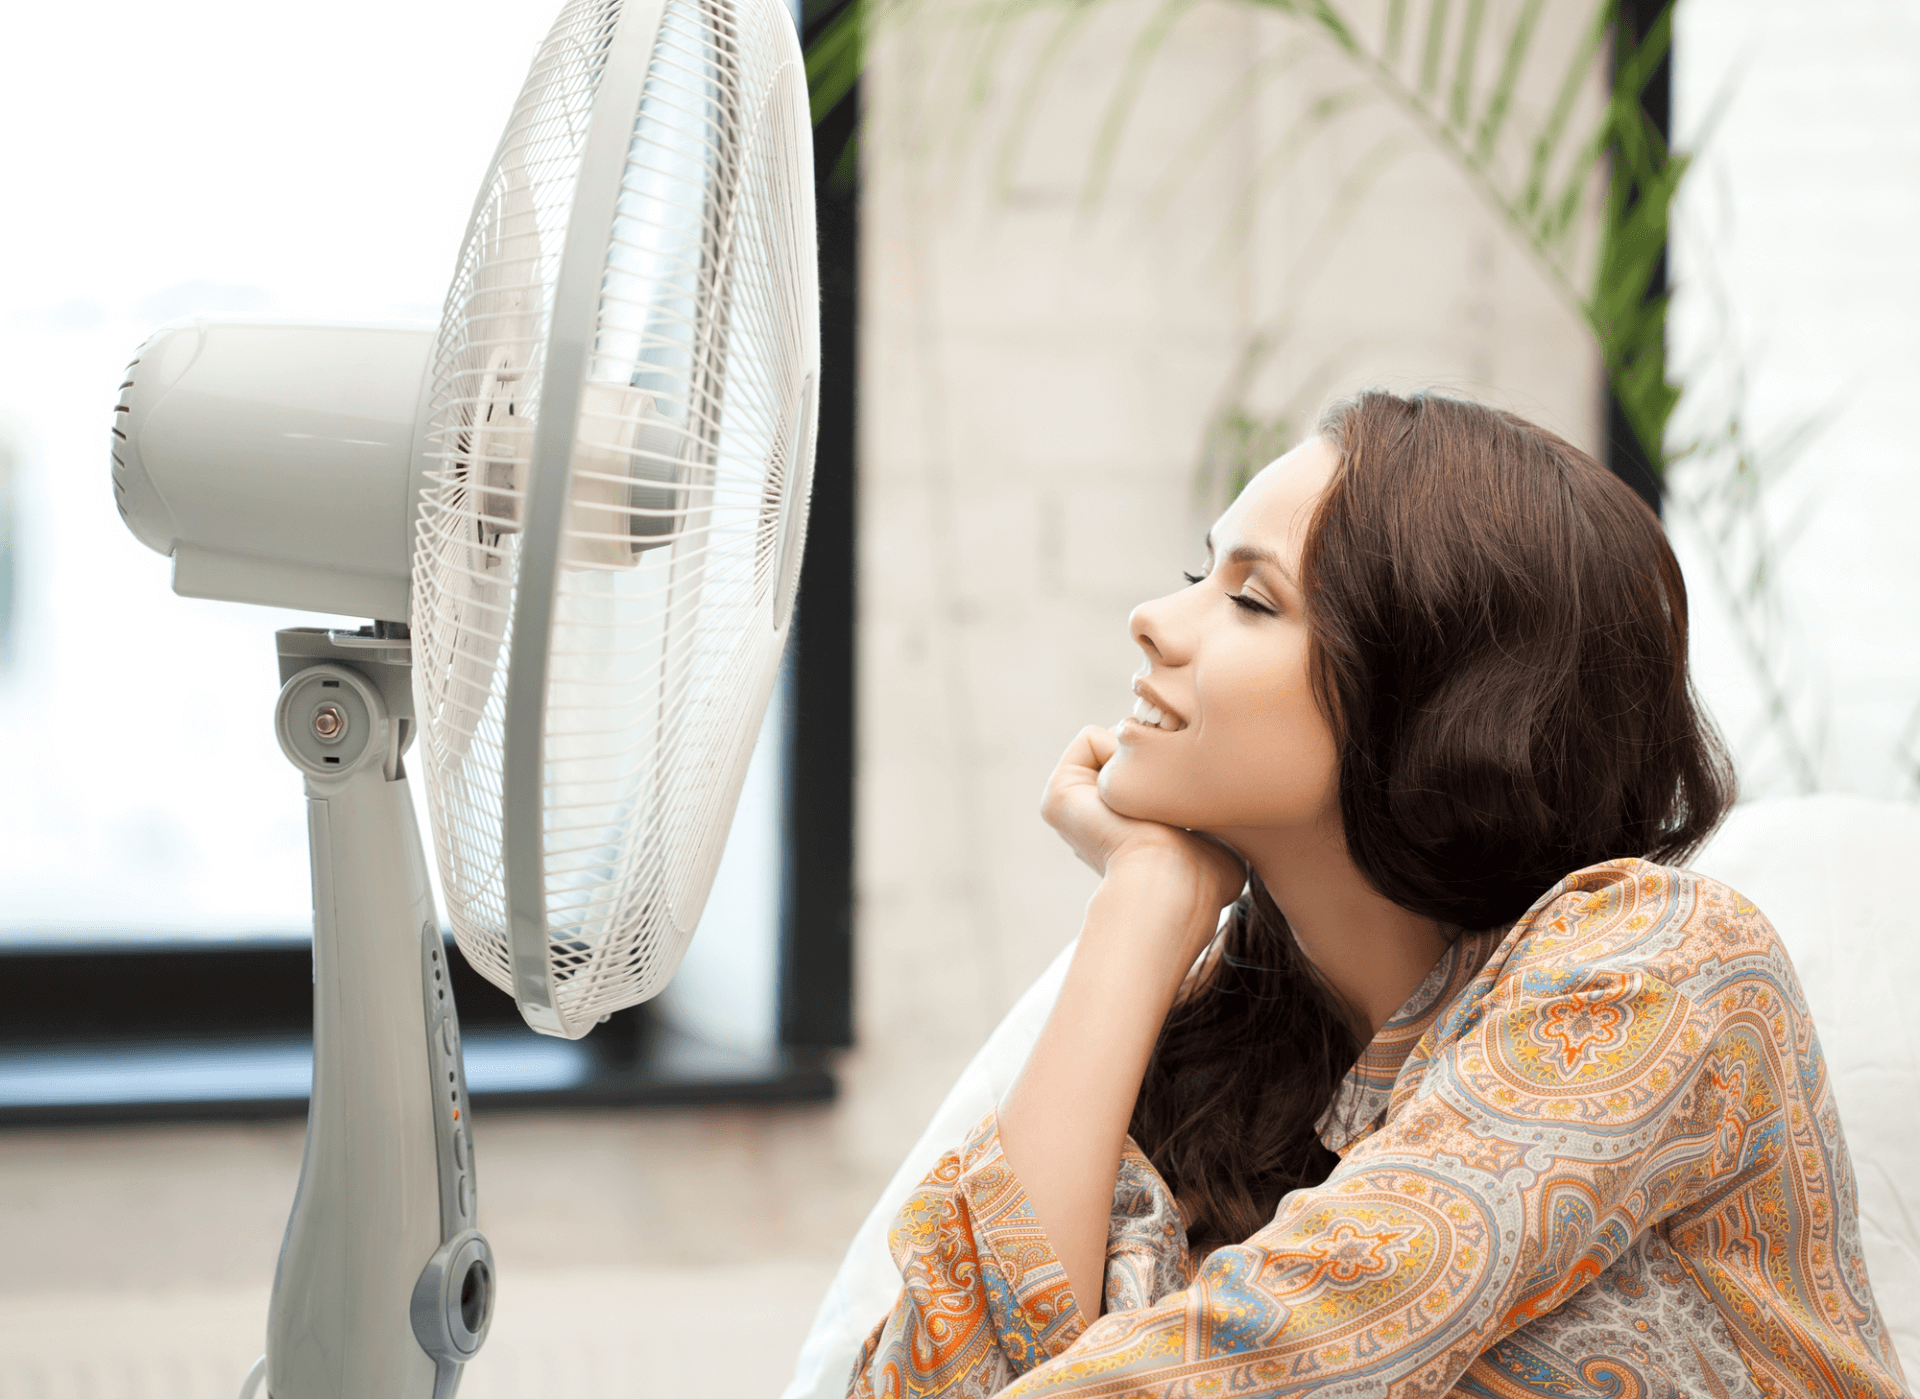 5 Tips to Take the Heat off Your Summer Power Bill